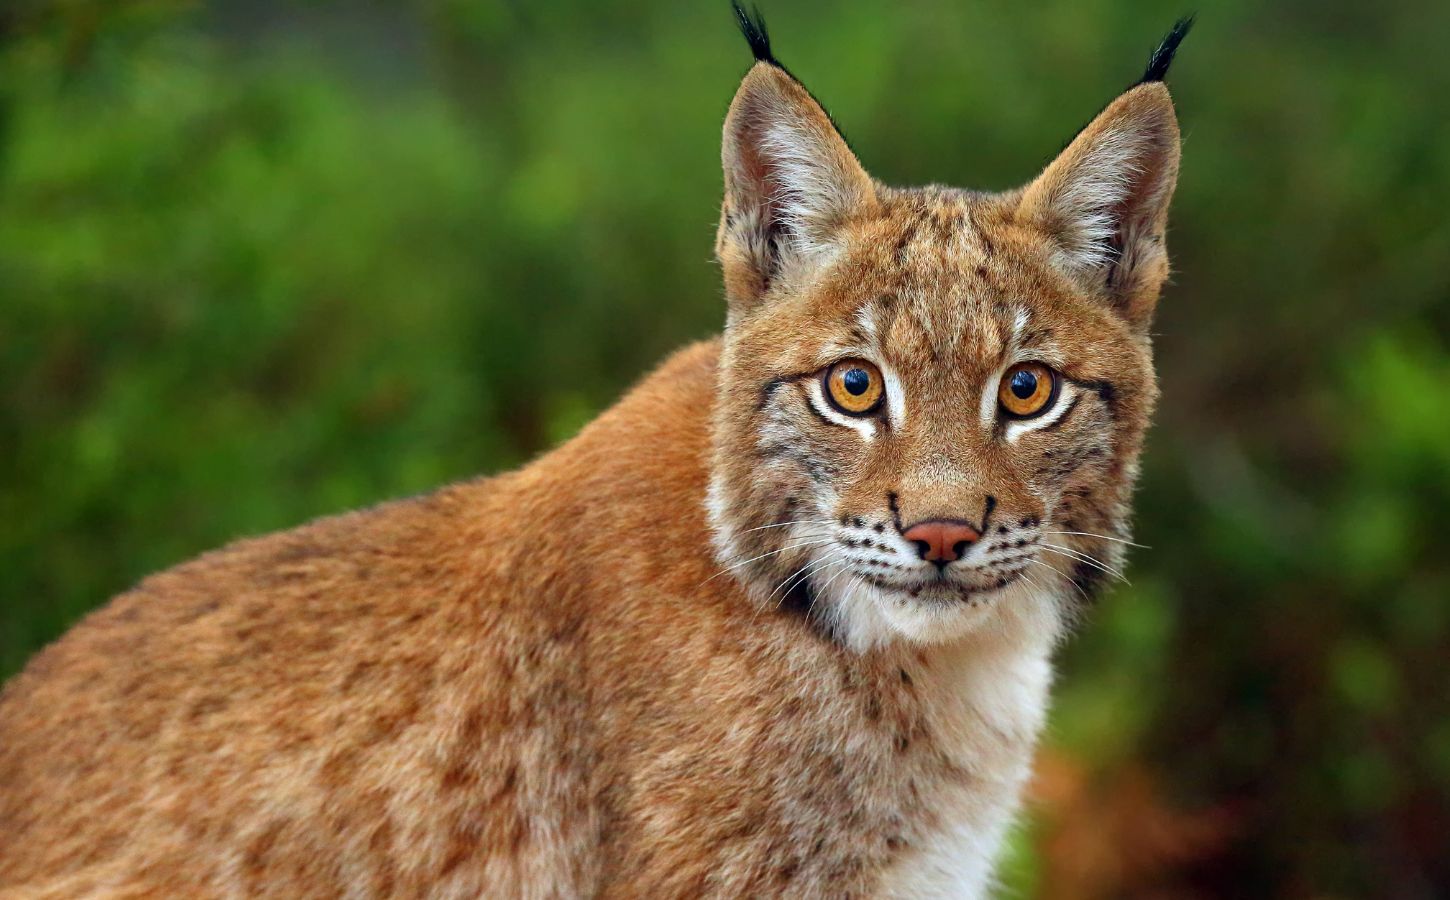 A close up picture of a lynx staring at the camera